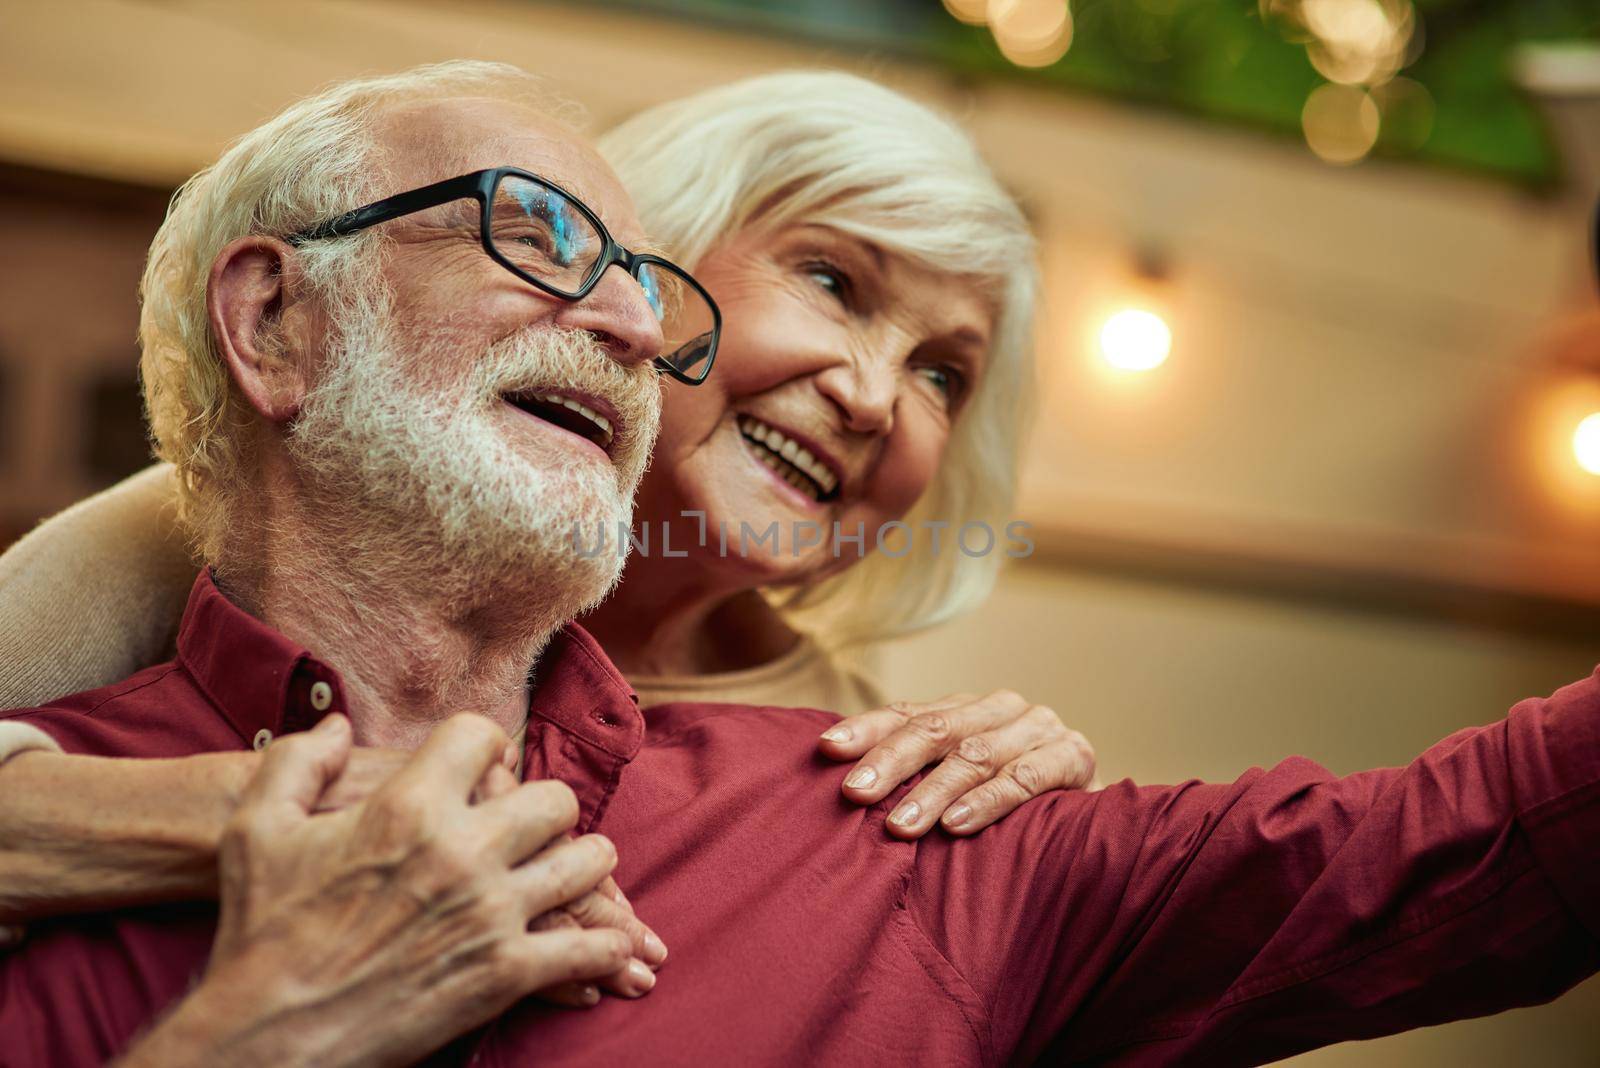 Smiling elderly married couple holding hands while making selfie together in the evening outdoors. Lifestyle concept